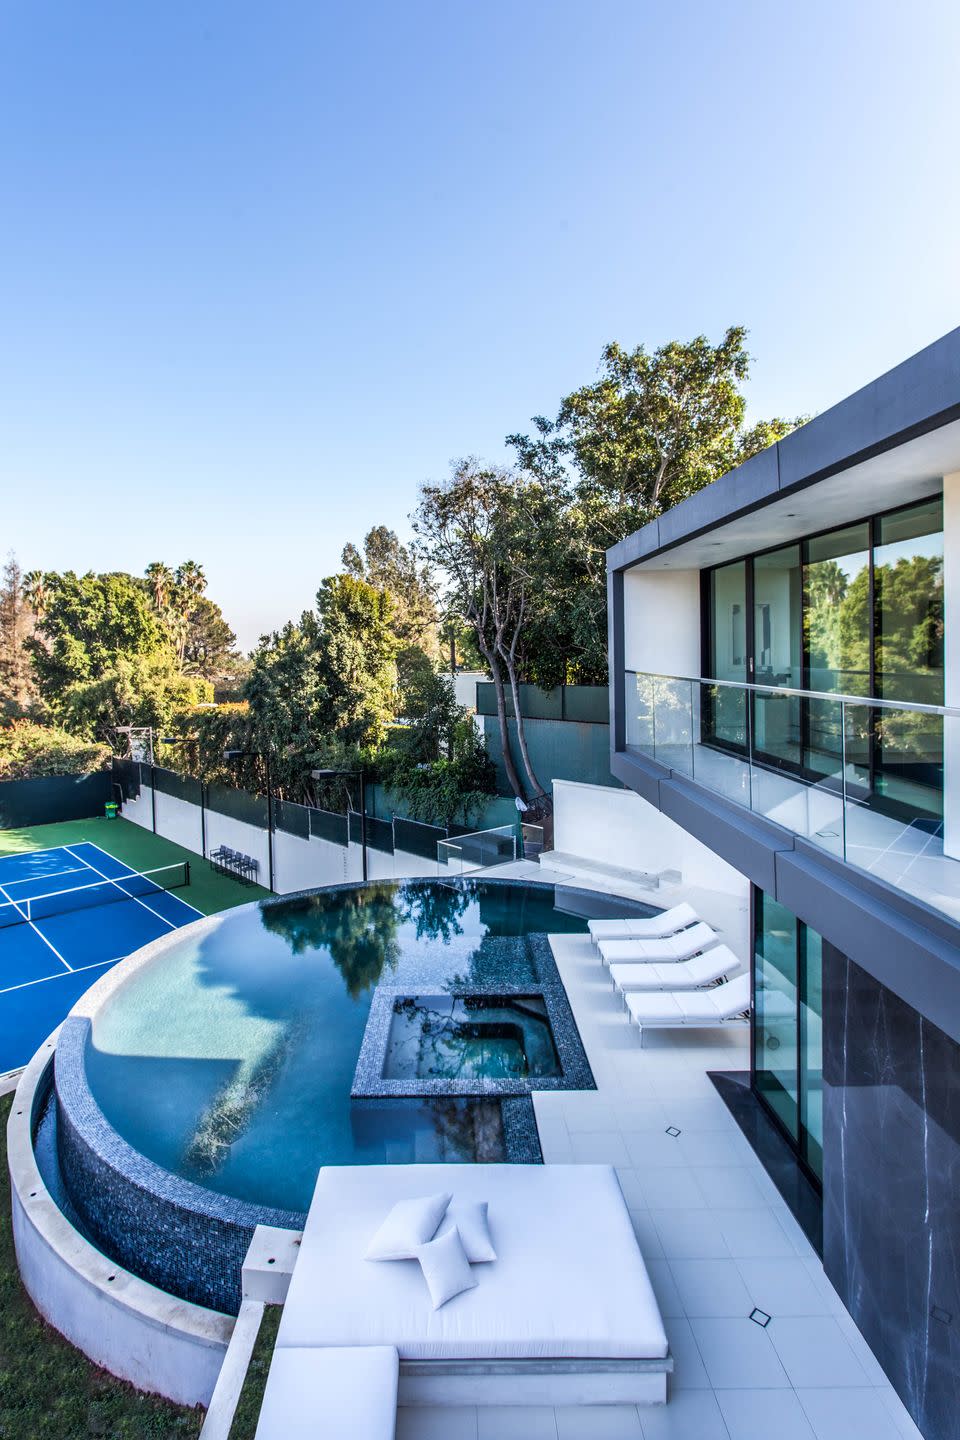 4) One of the Home's Two Pools, Which Overlooks the Full Tennis Court.